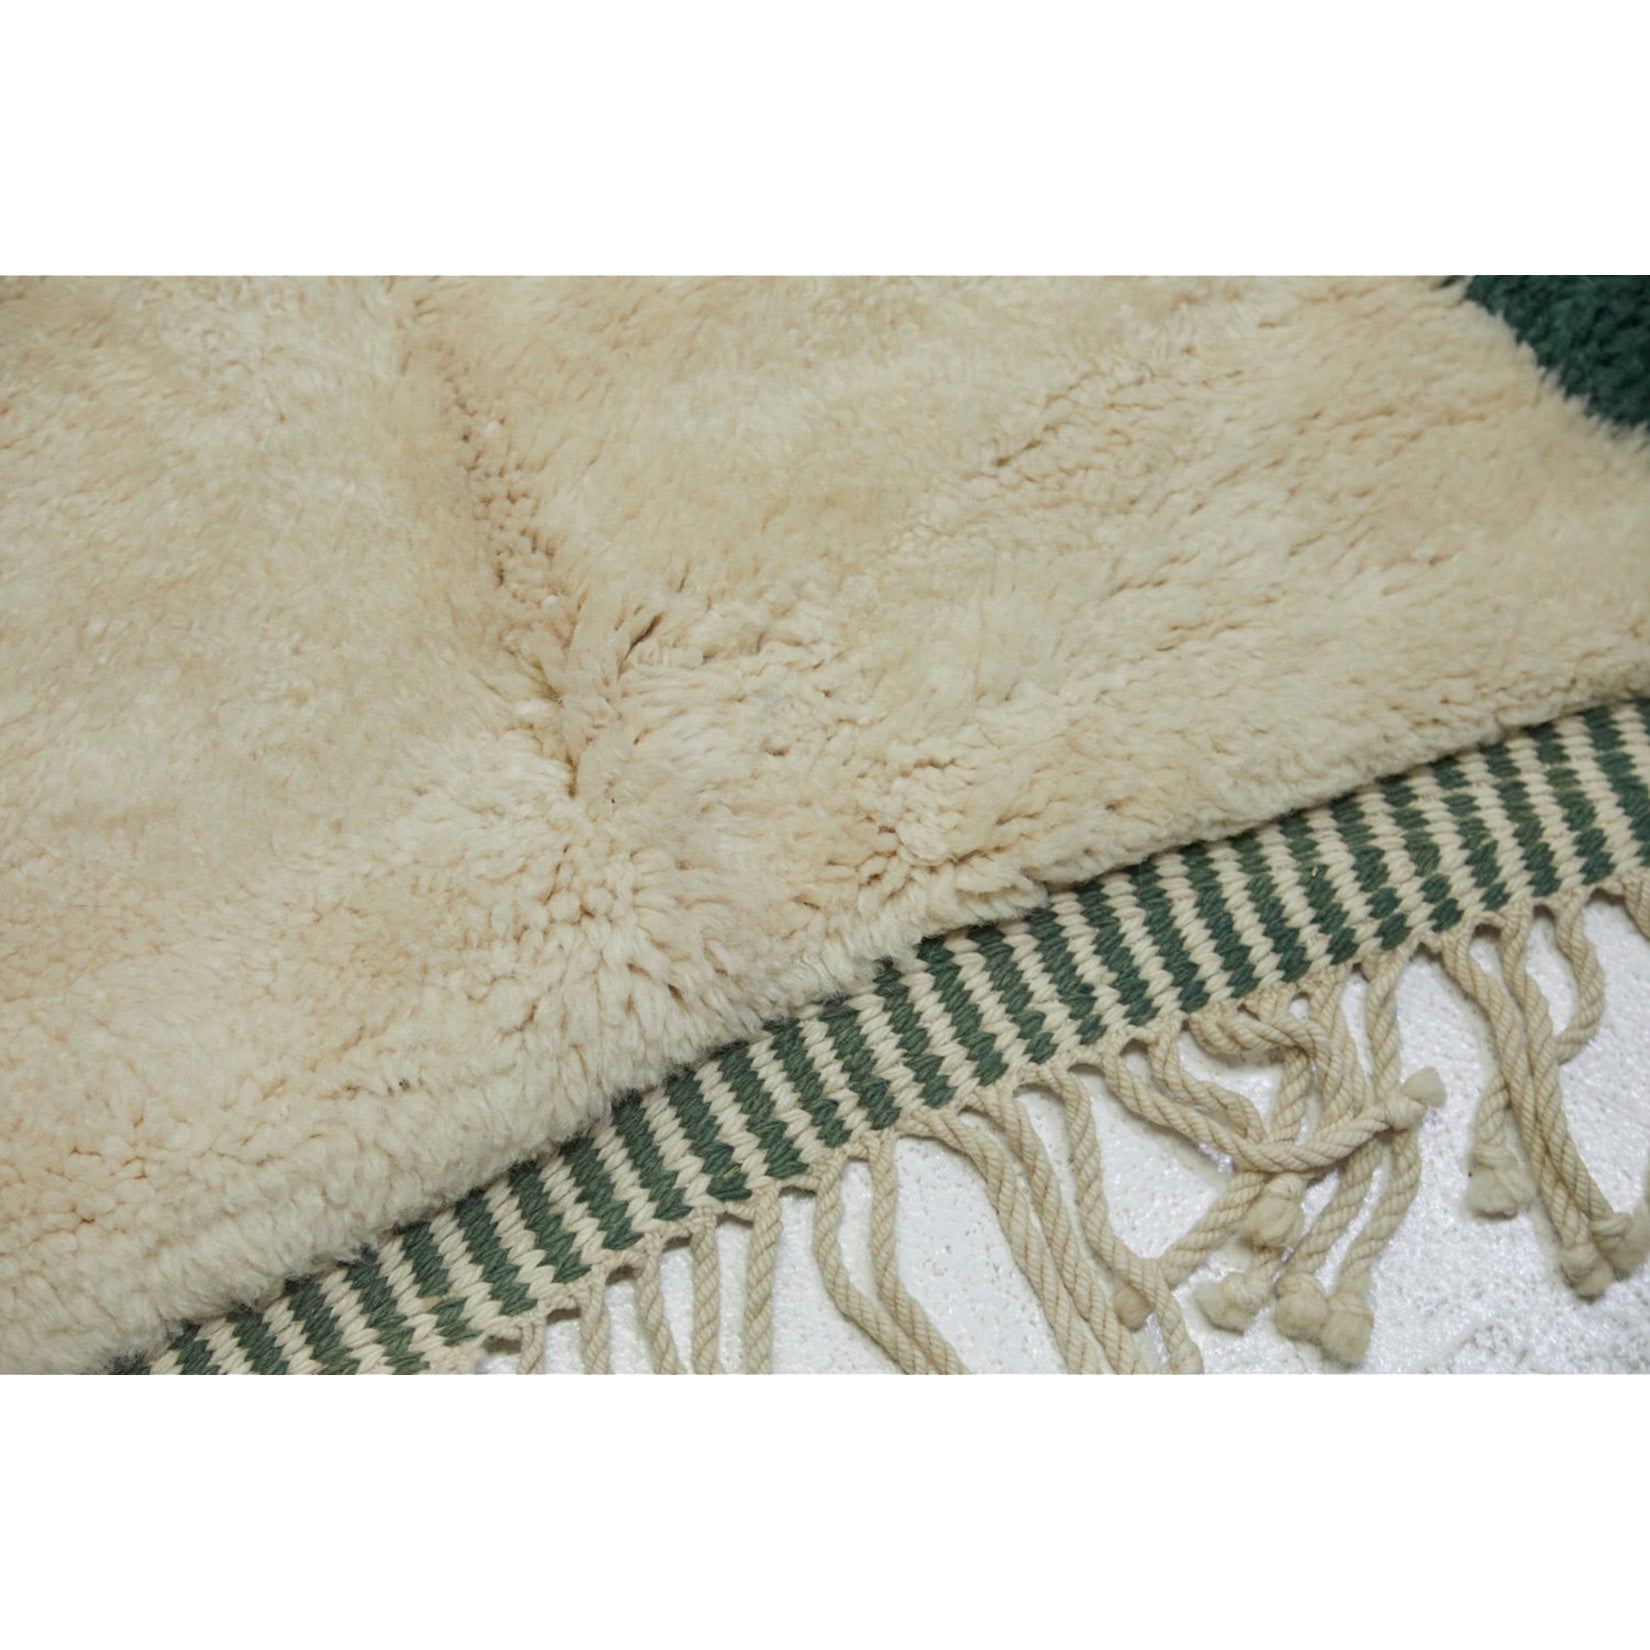 Braided fringe detail on oversized Moroccan rug in forest green and white- Kantara | Moroccan Rugs